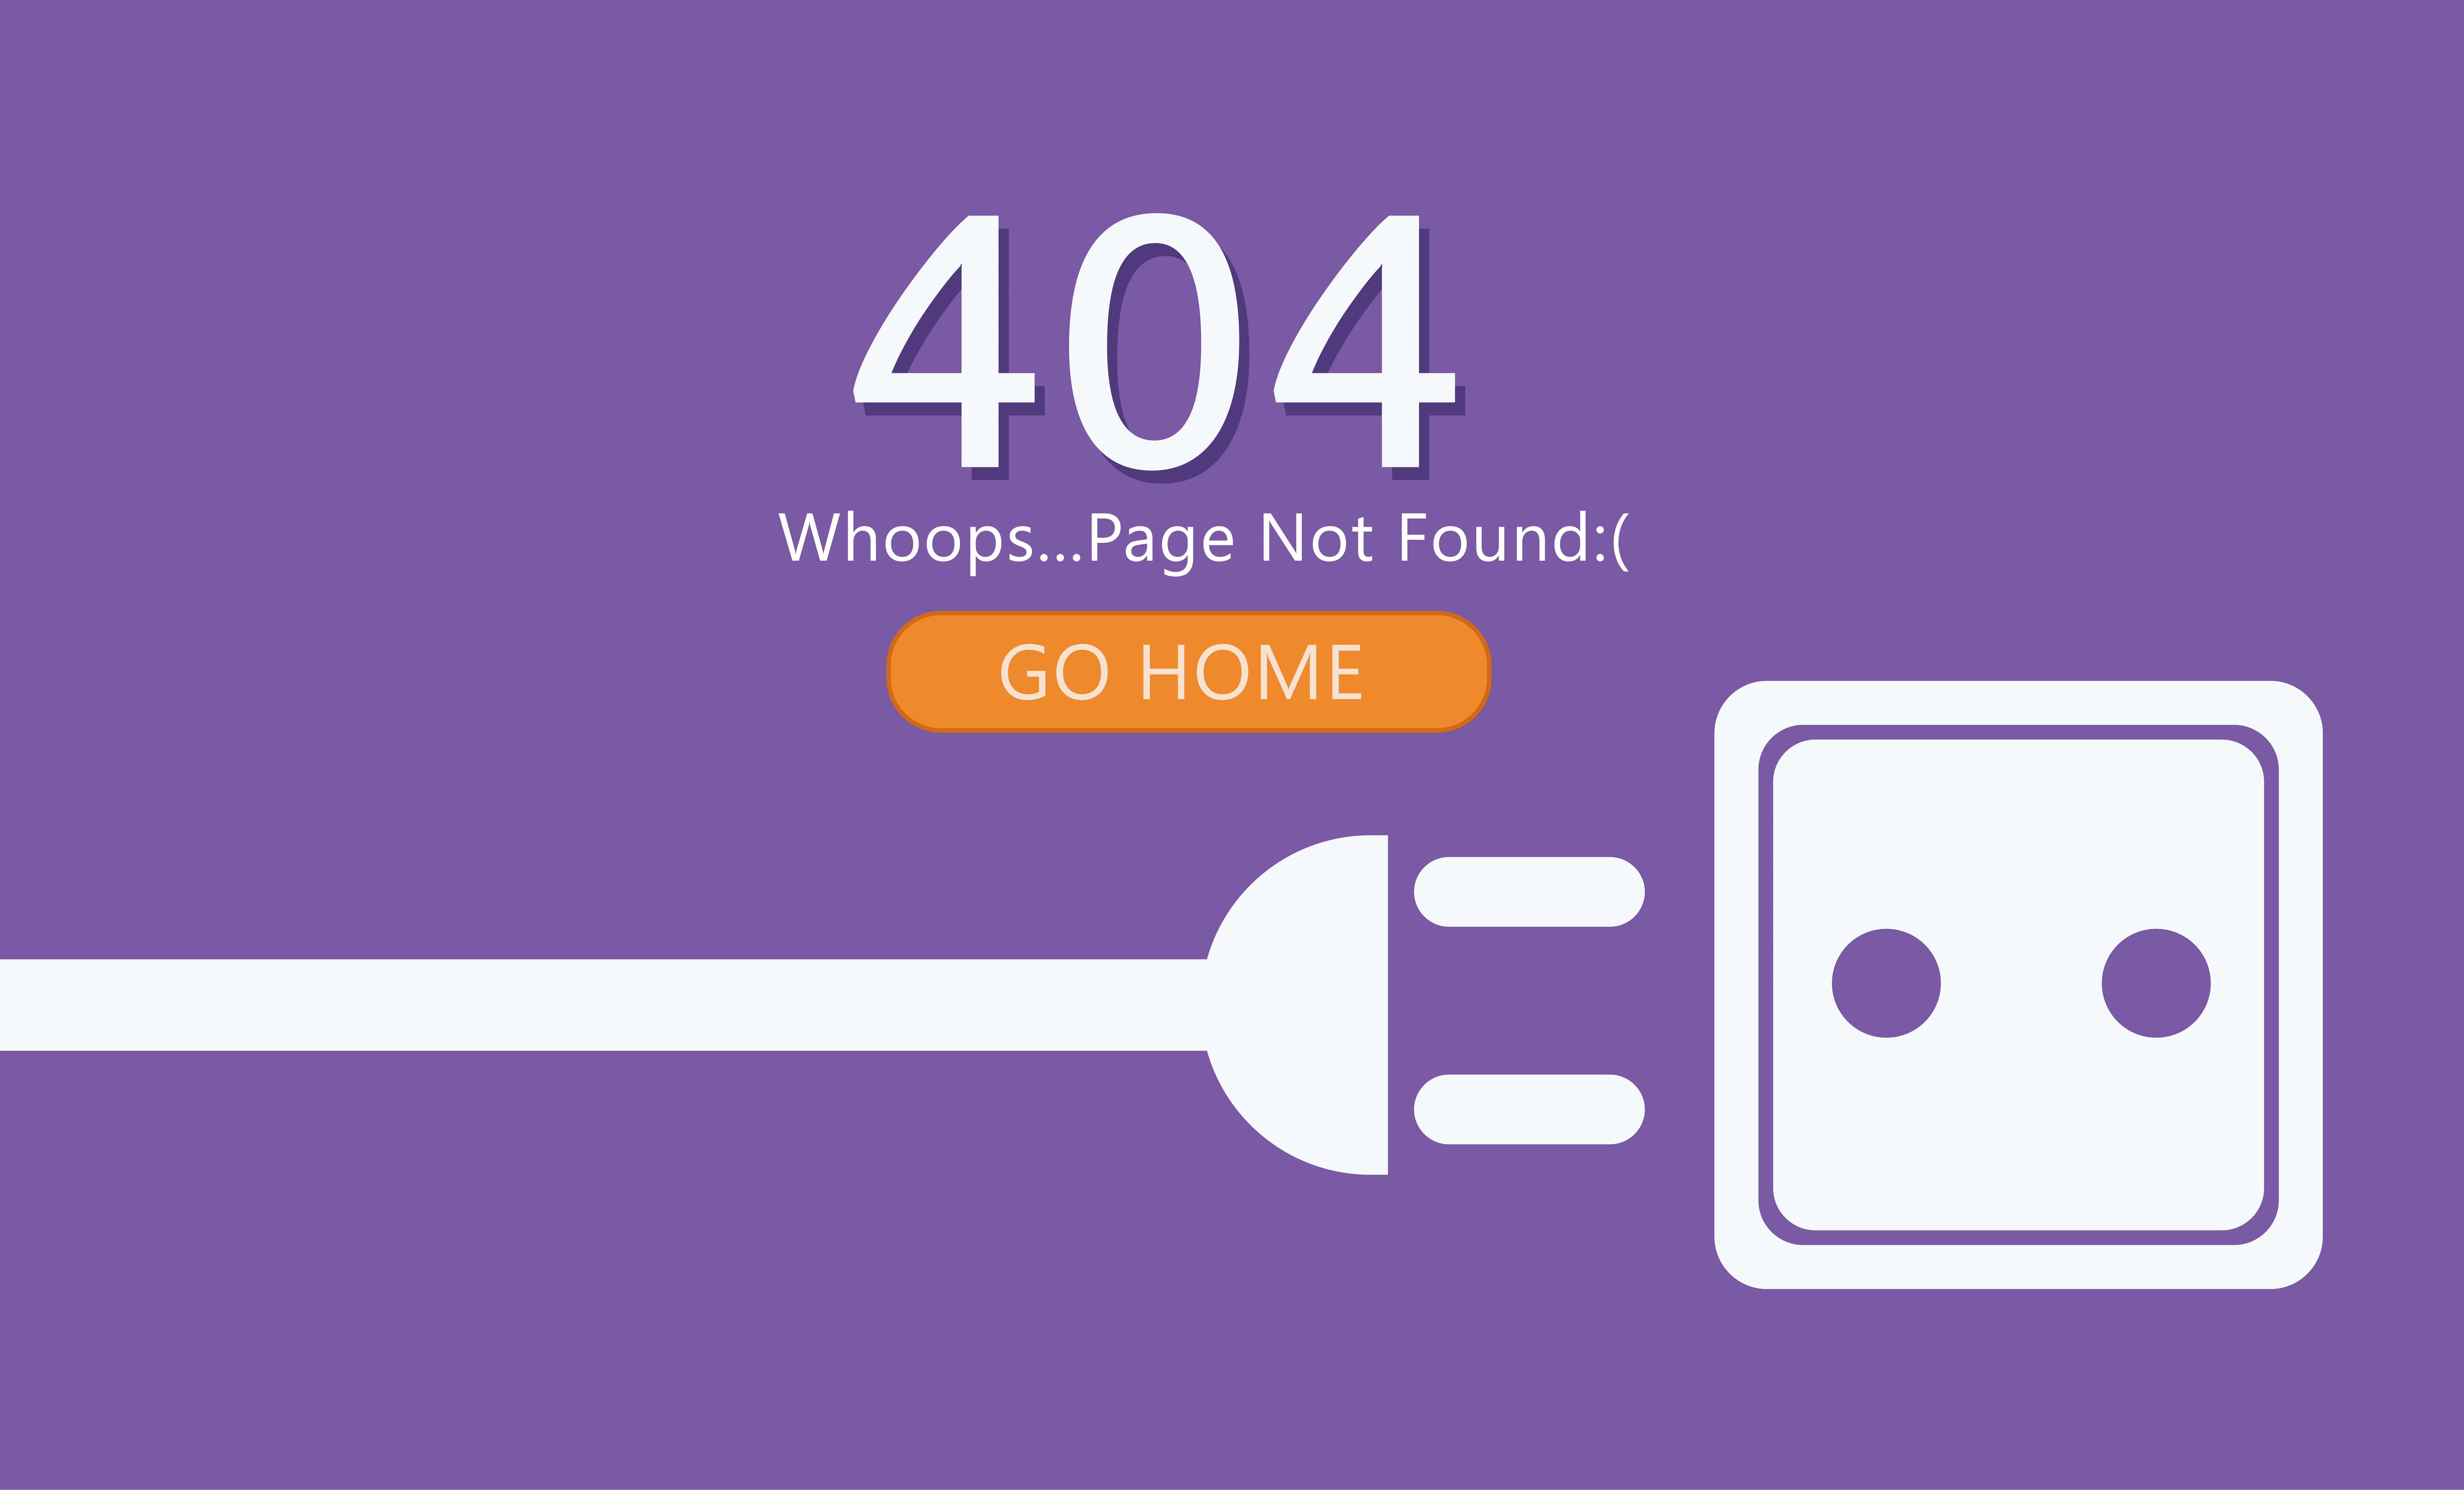 Page 404 Not Found. Wire with socket. 